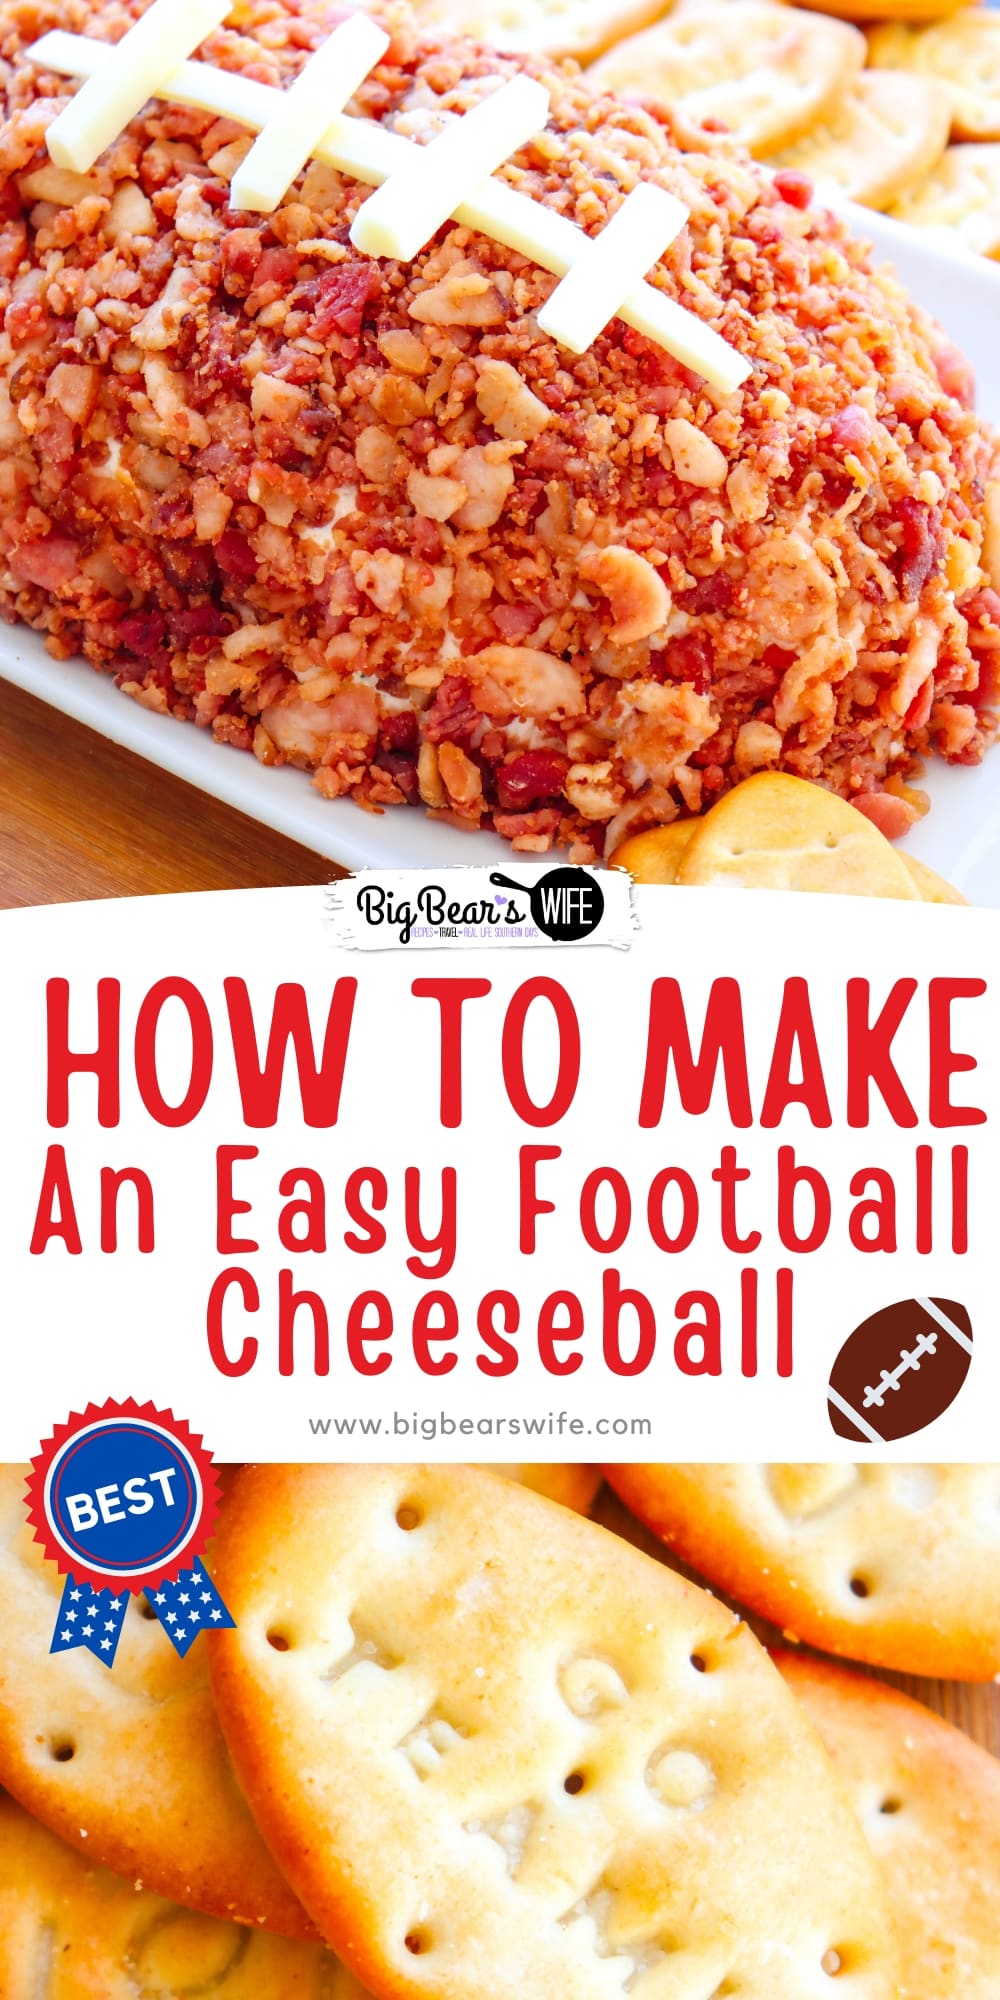 Make this Easy Football Cheeseball for the big game or any football party! You'll only need 5 ingredients and some plastic wrap to shape it! It'll be perfect for your game day spread! via @bigbearswife